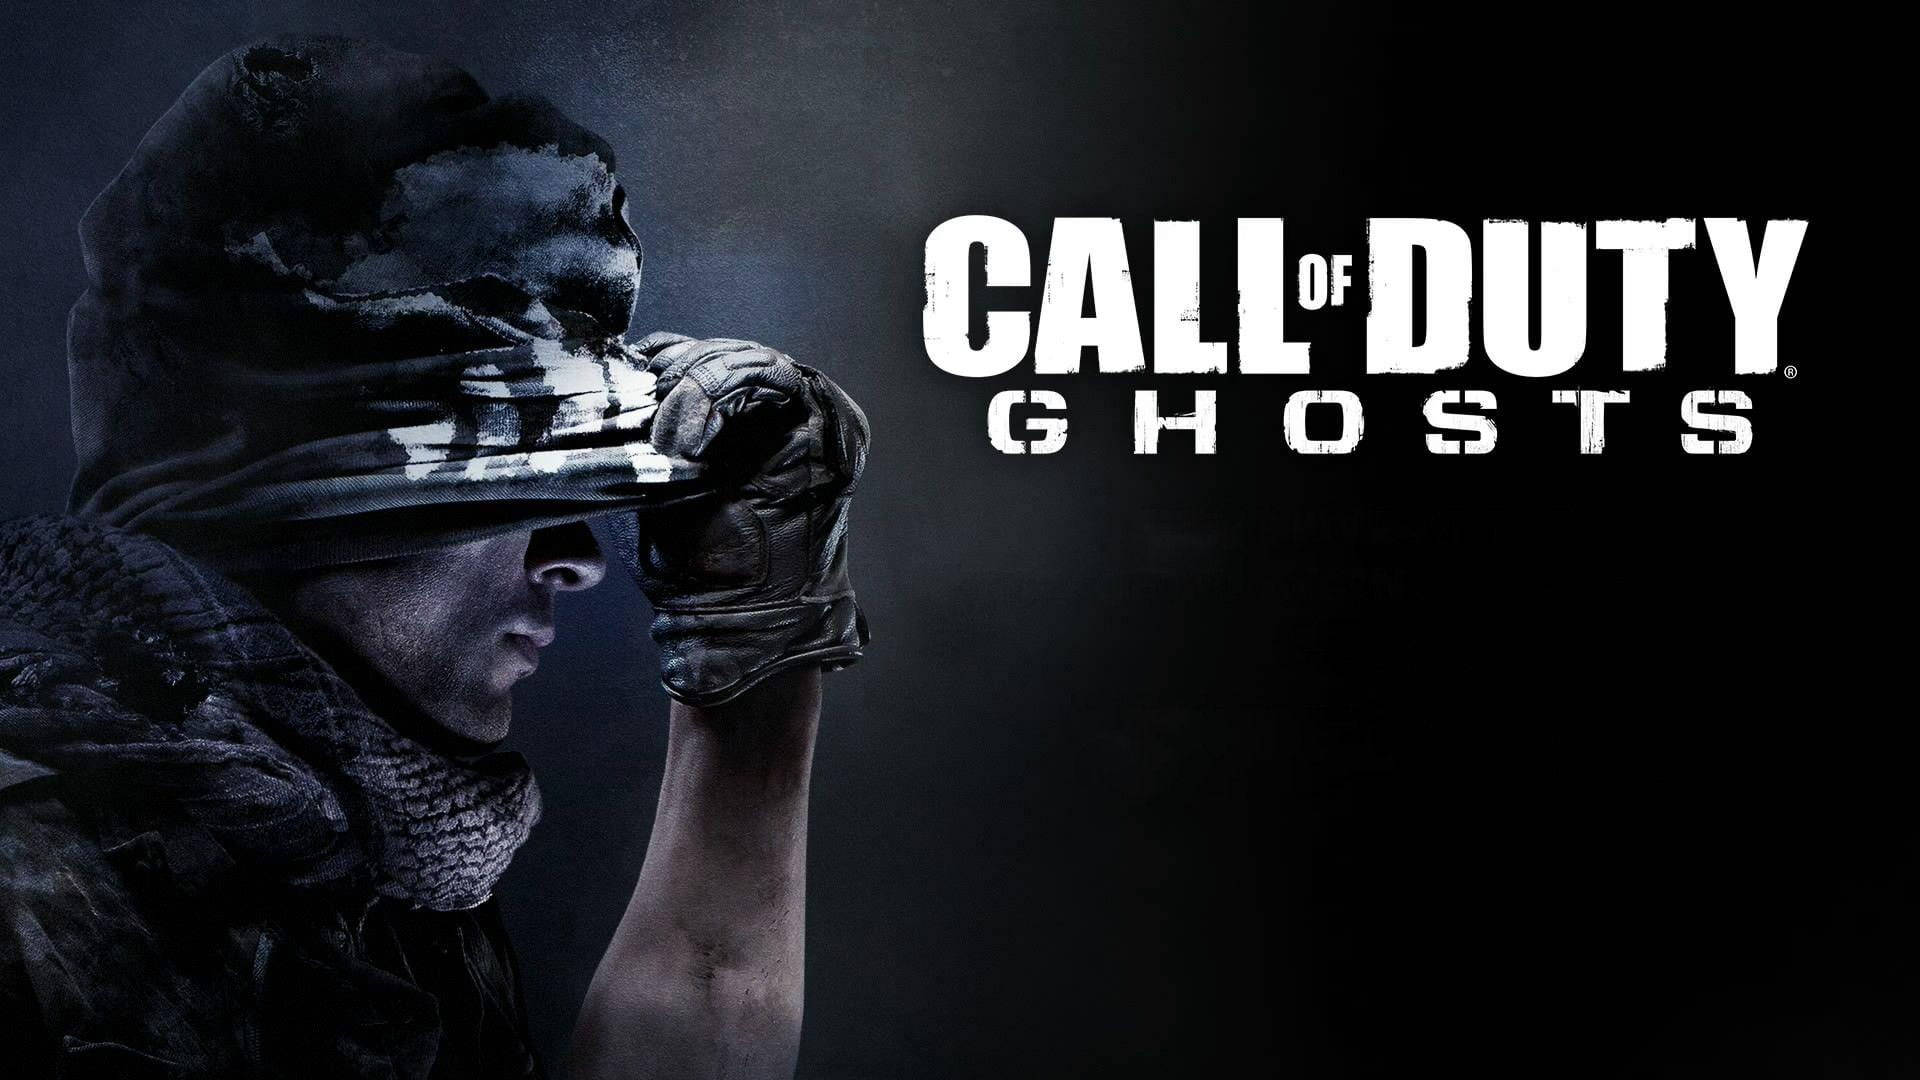 Call Of Duty Ghost Holding Mask Wallpaper